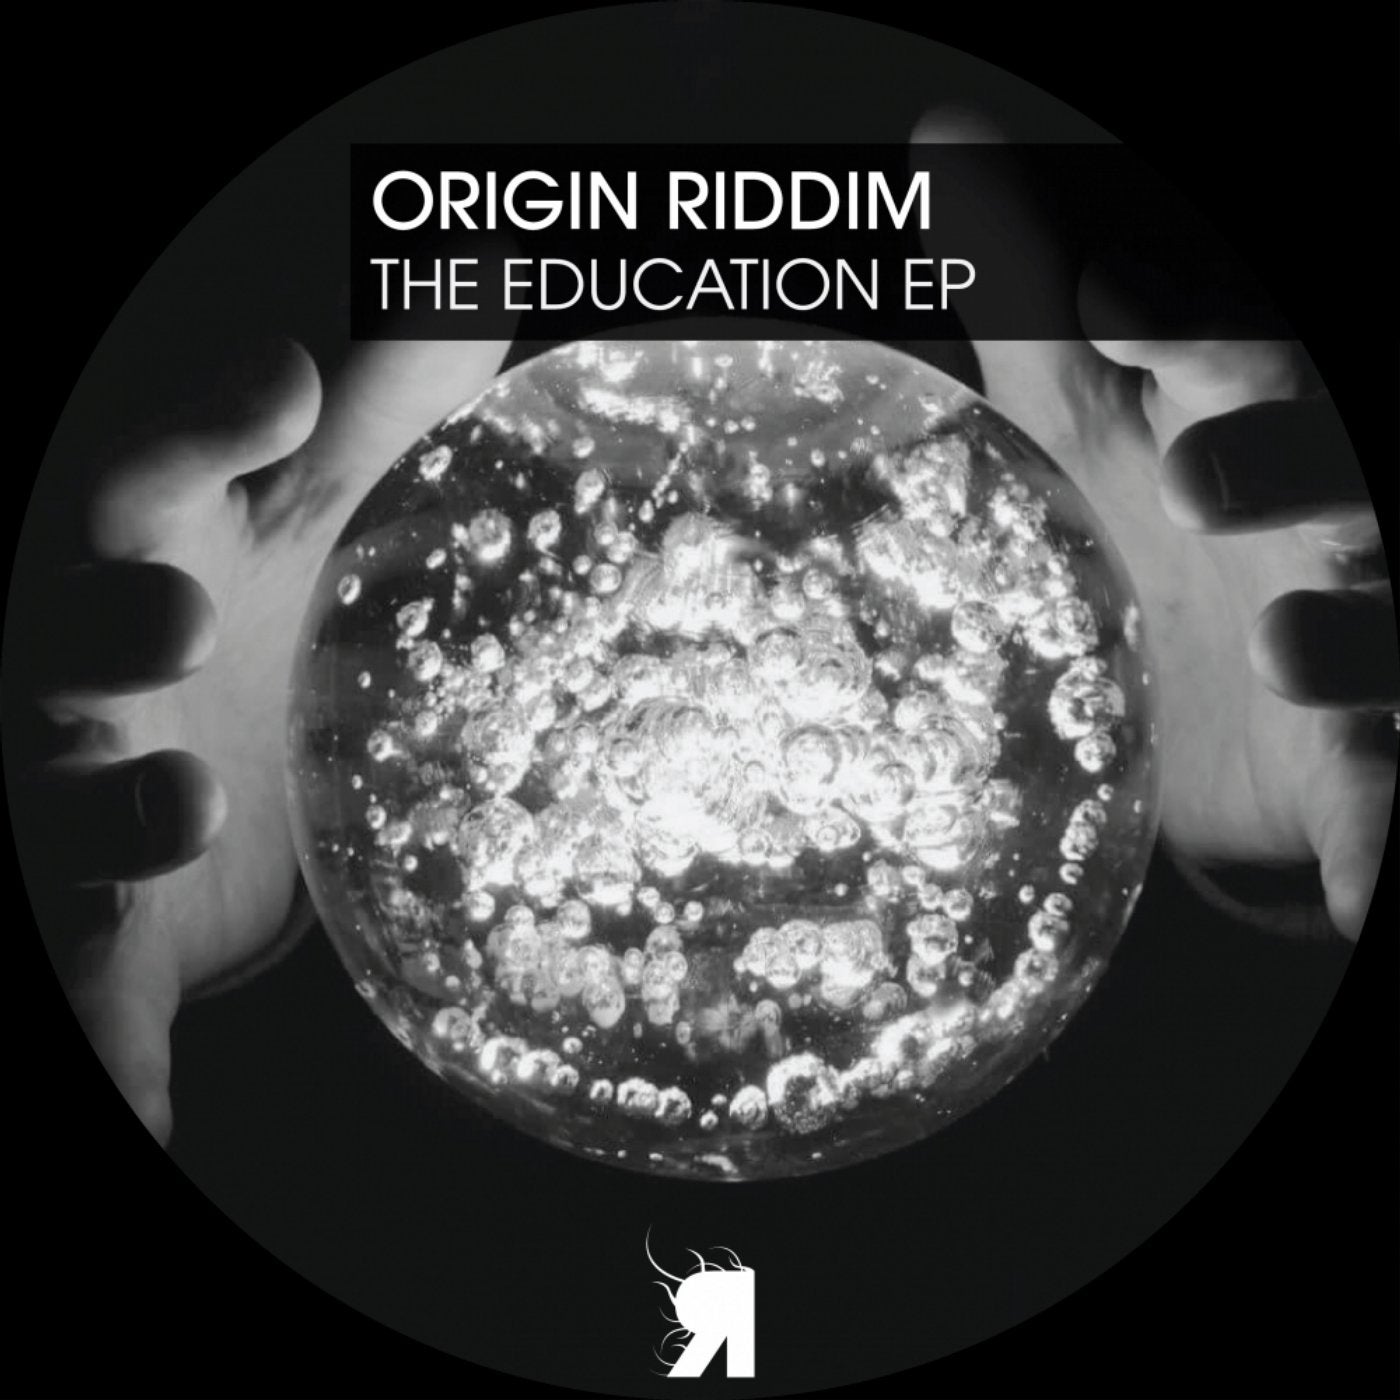 The Education EP